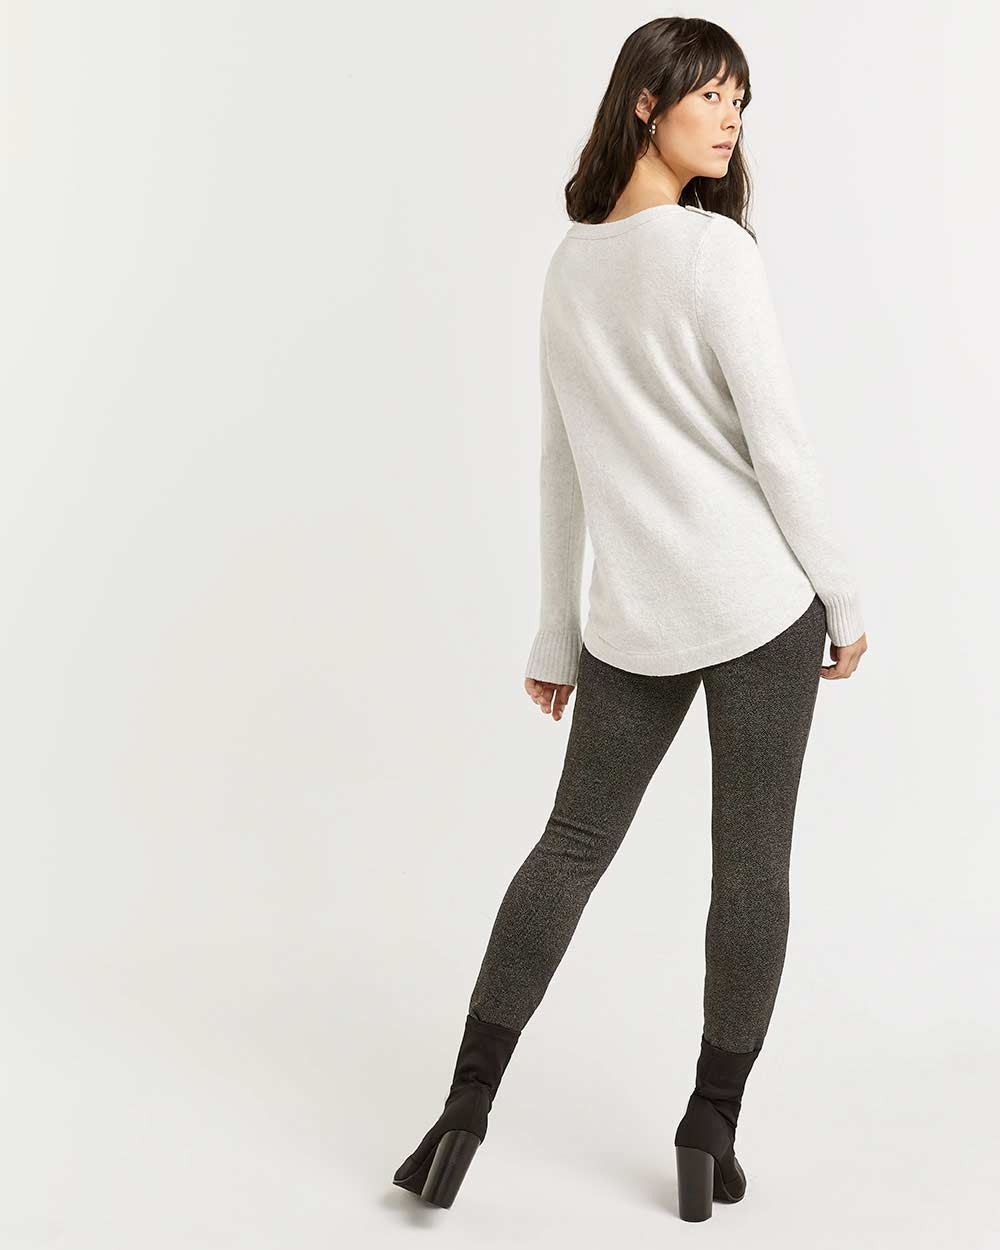 Boat Neck Sweater with Buttons at Shoulders | Regular | Reitmans